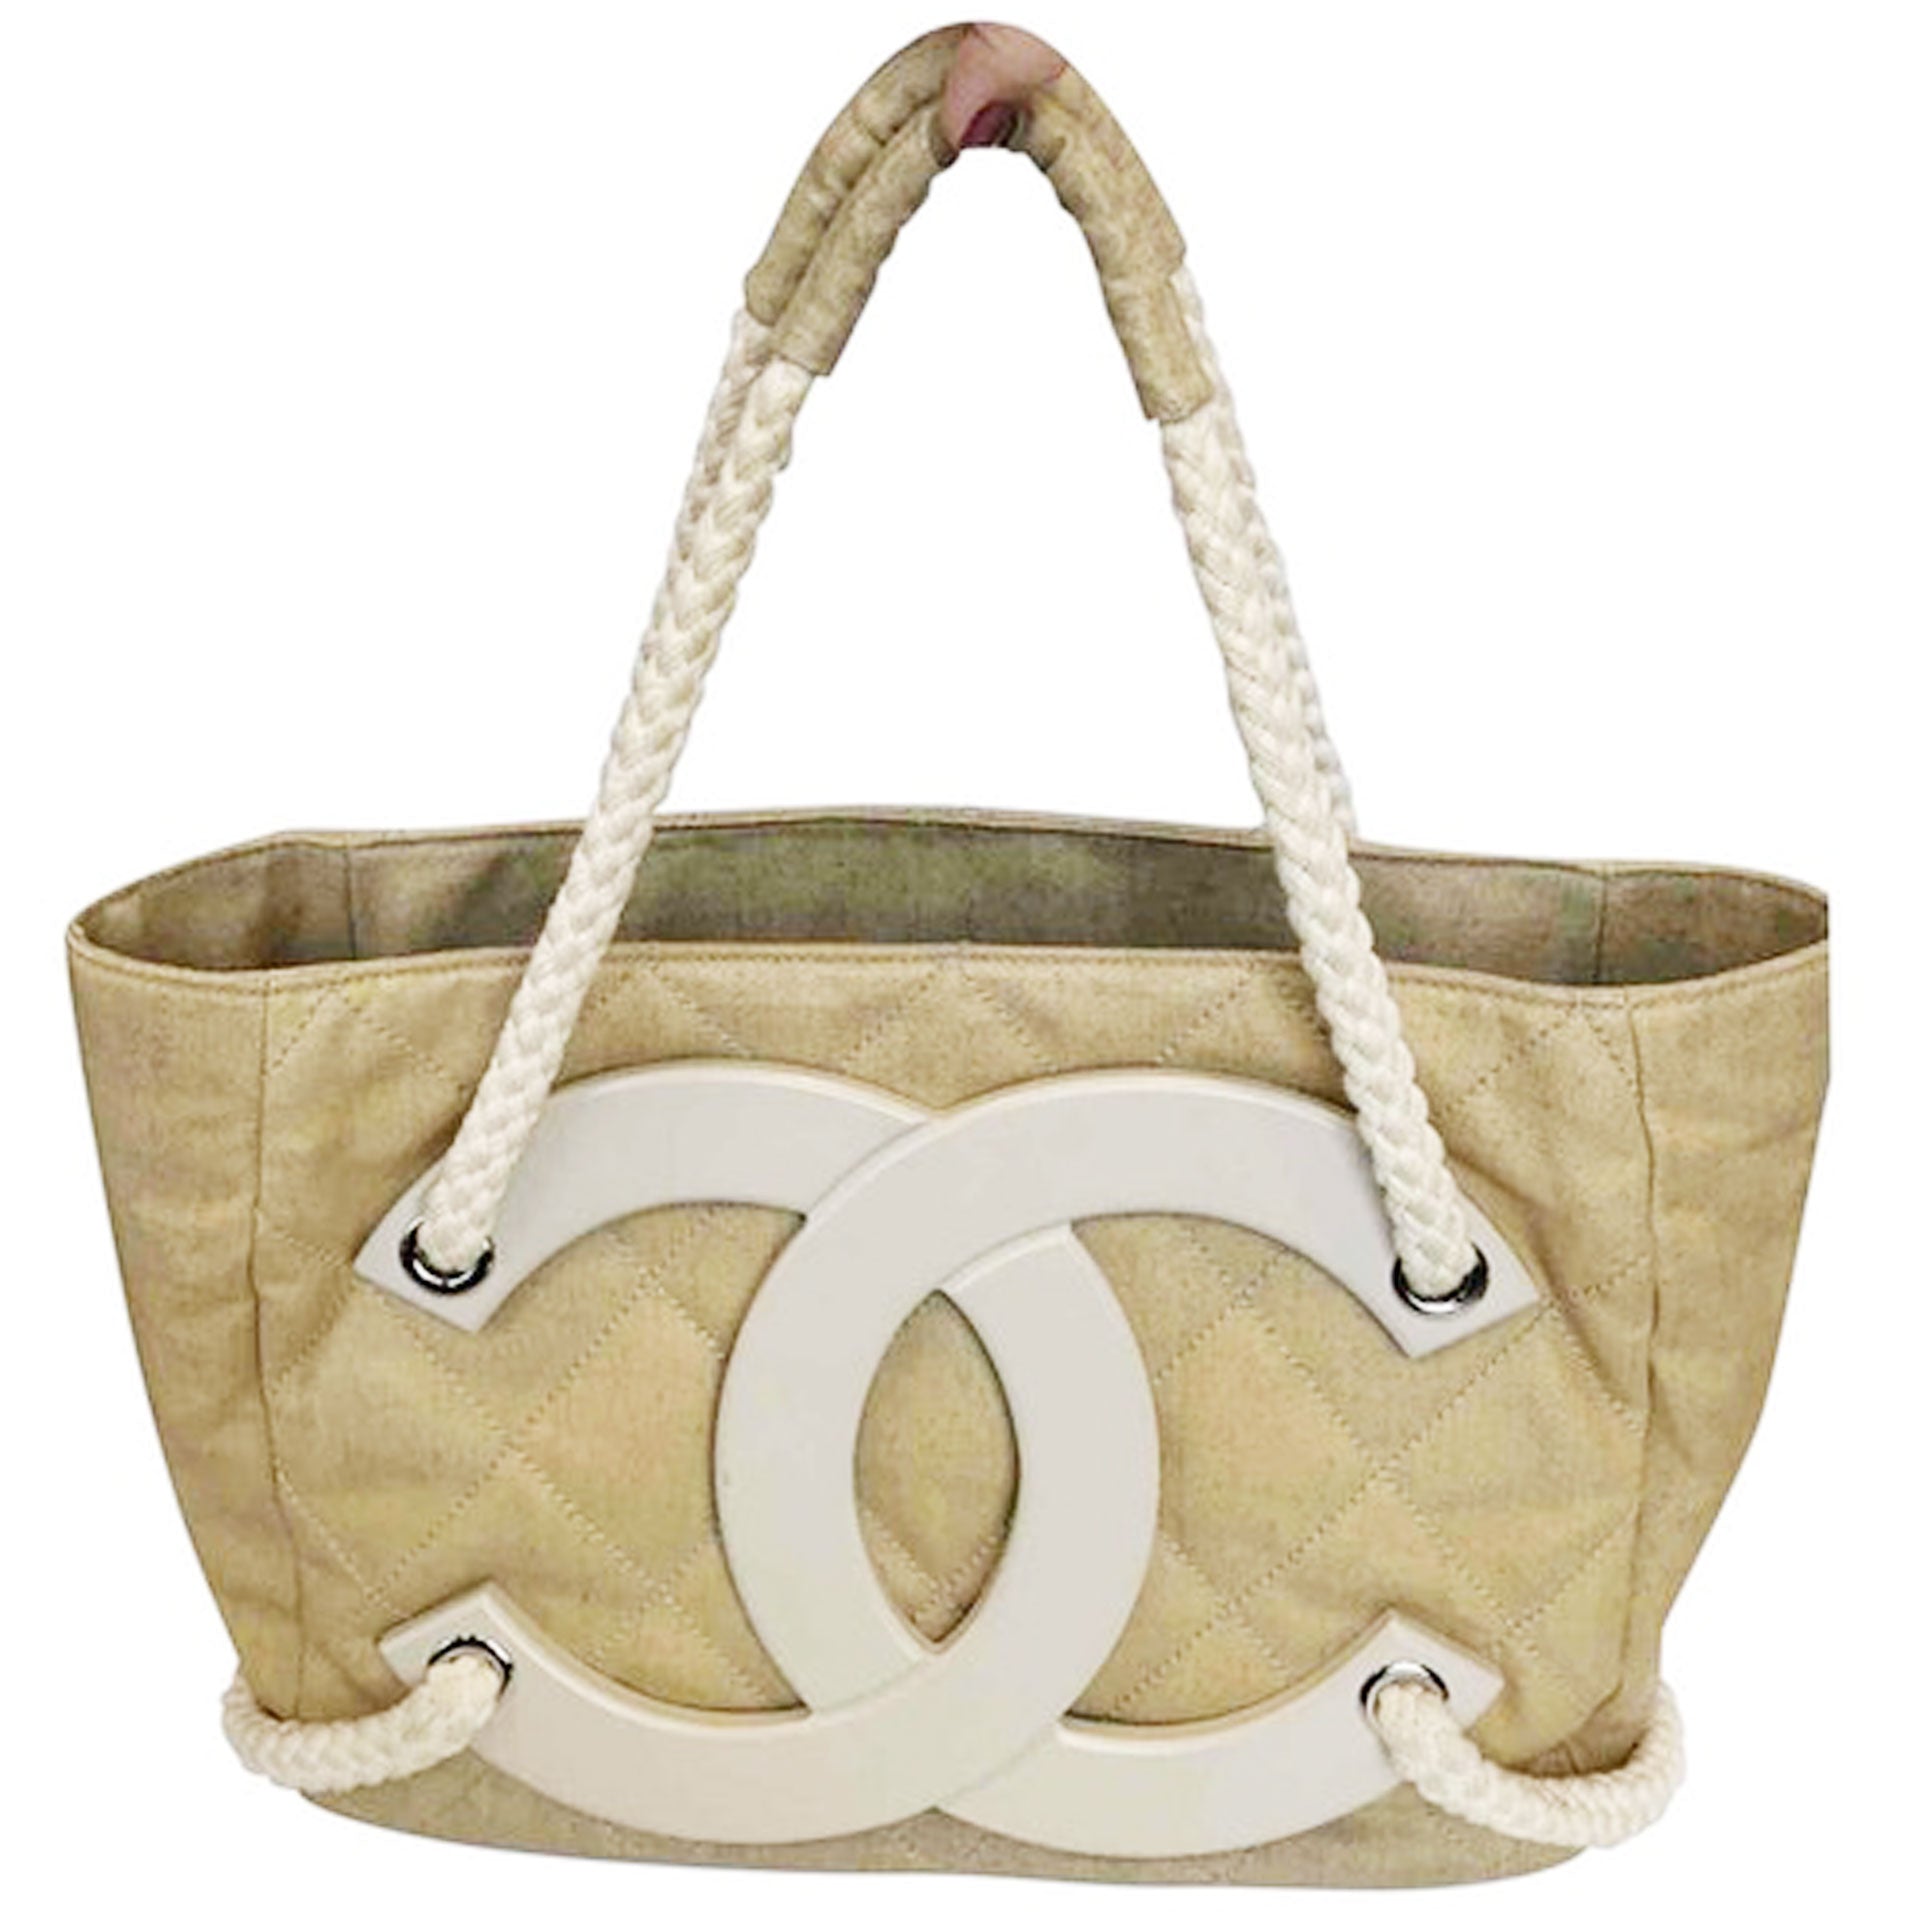 Chanel Logo Tote Bags